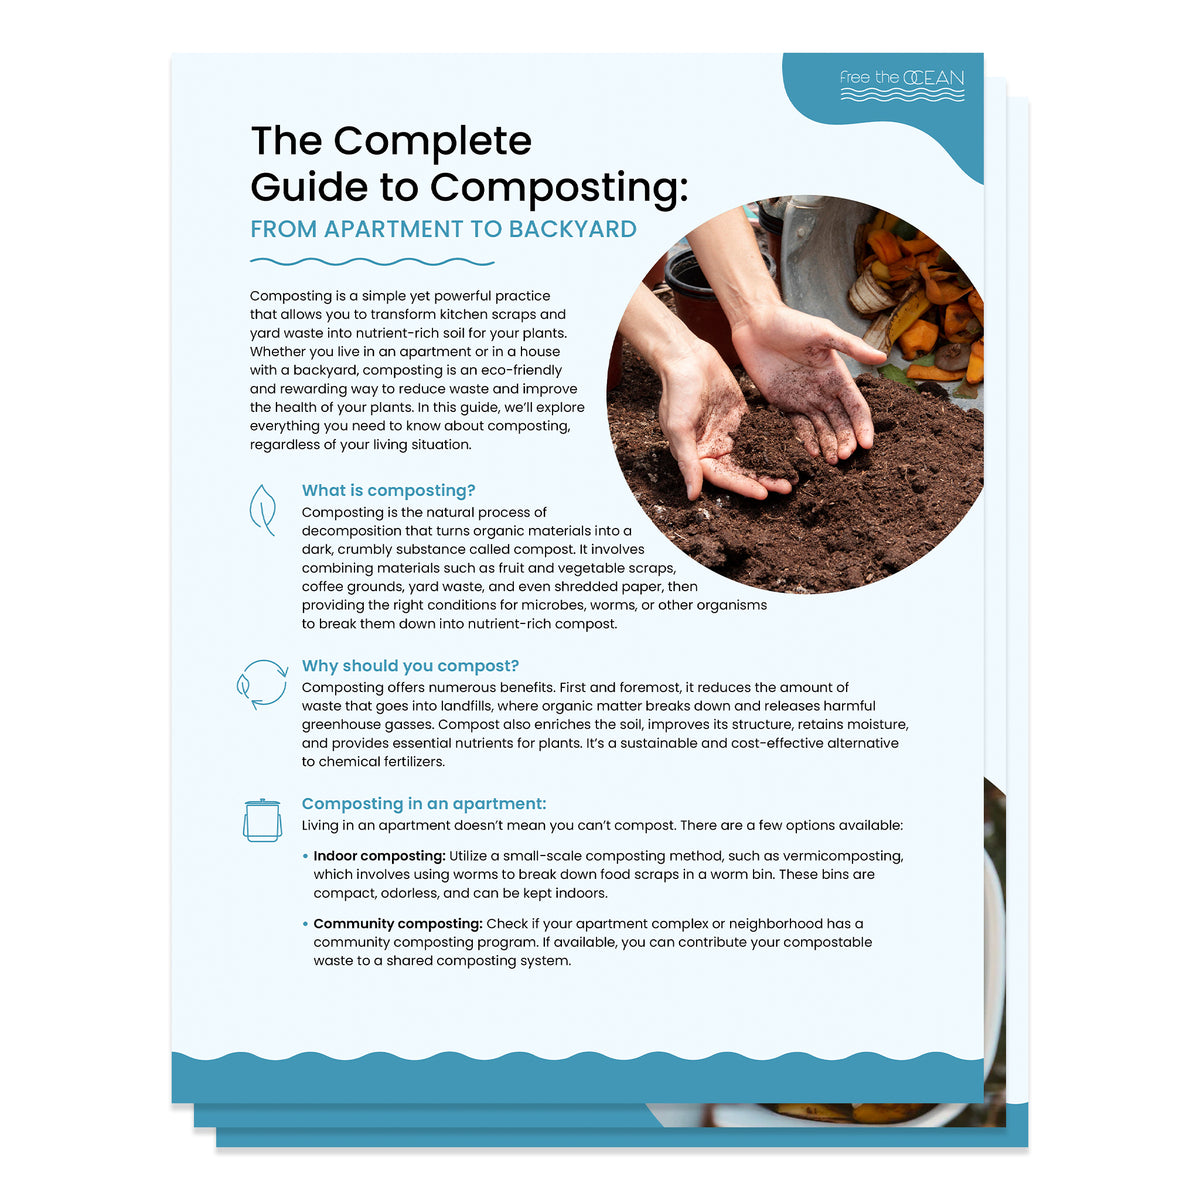 The Complete (Free) Guide to Composting